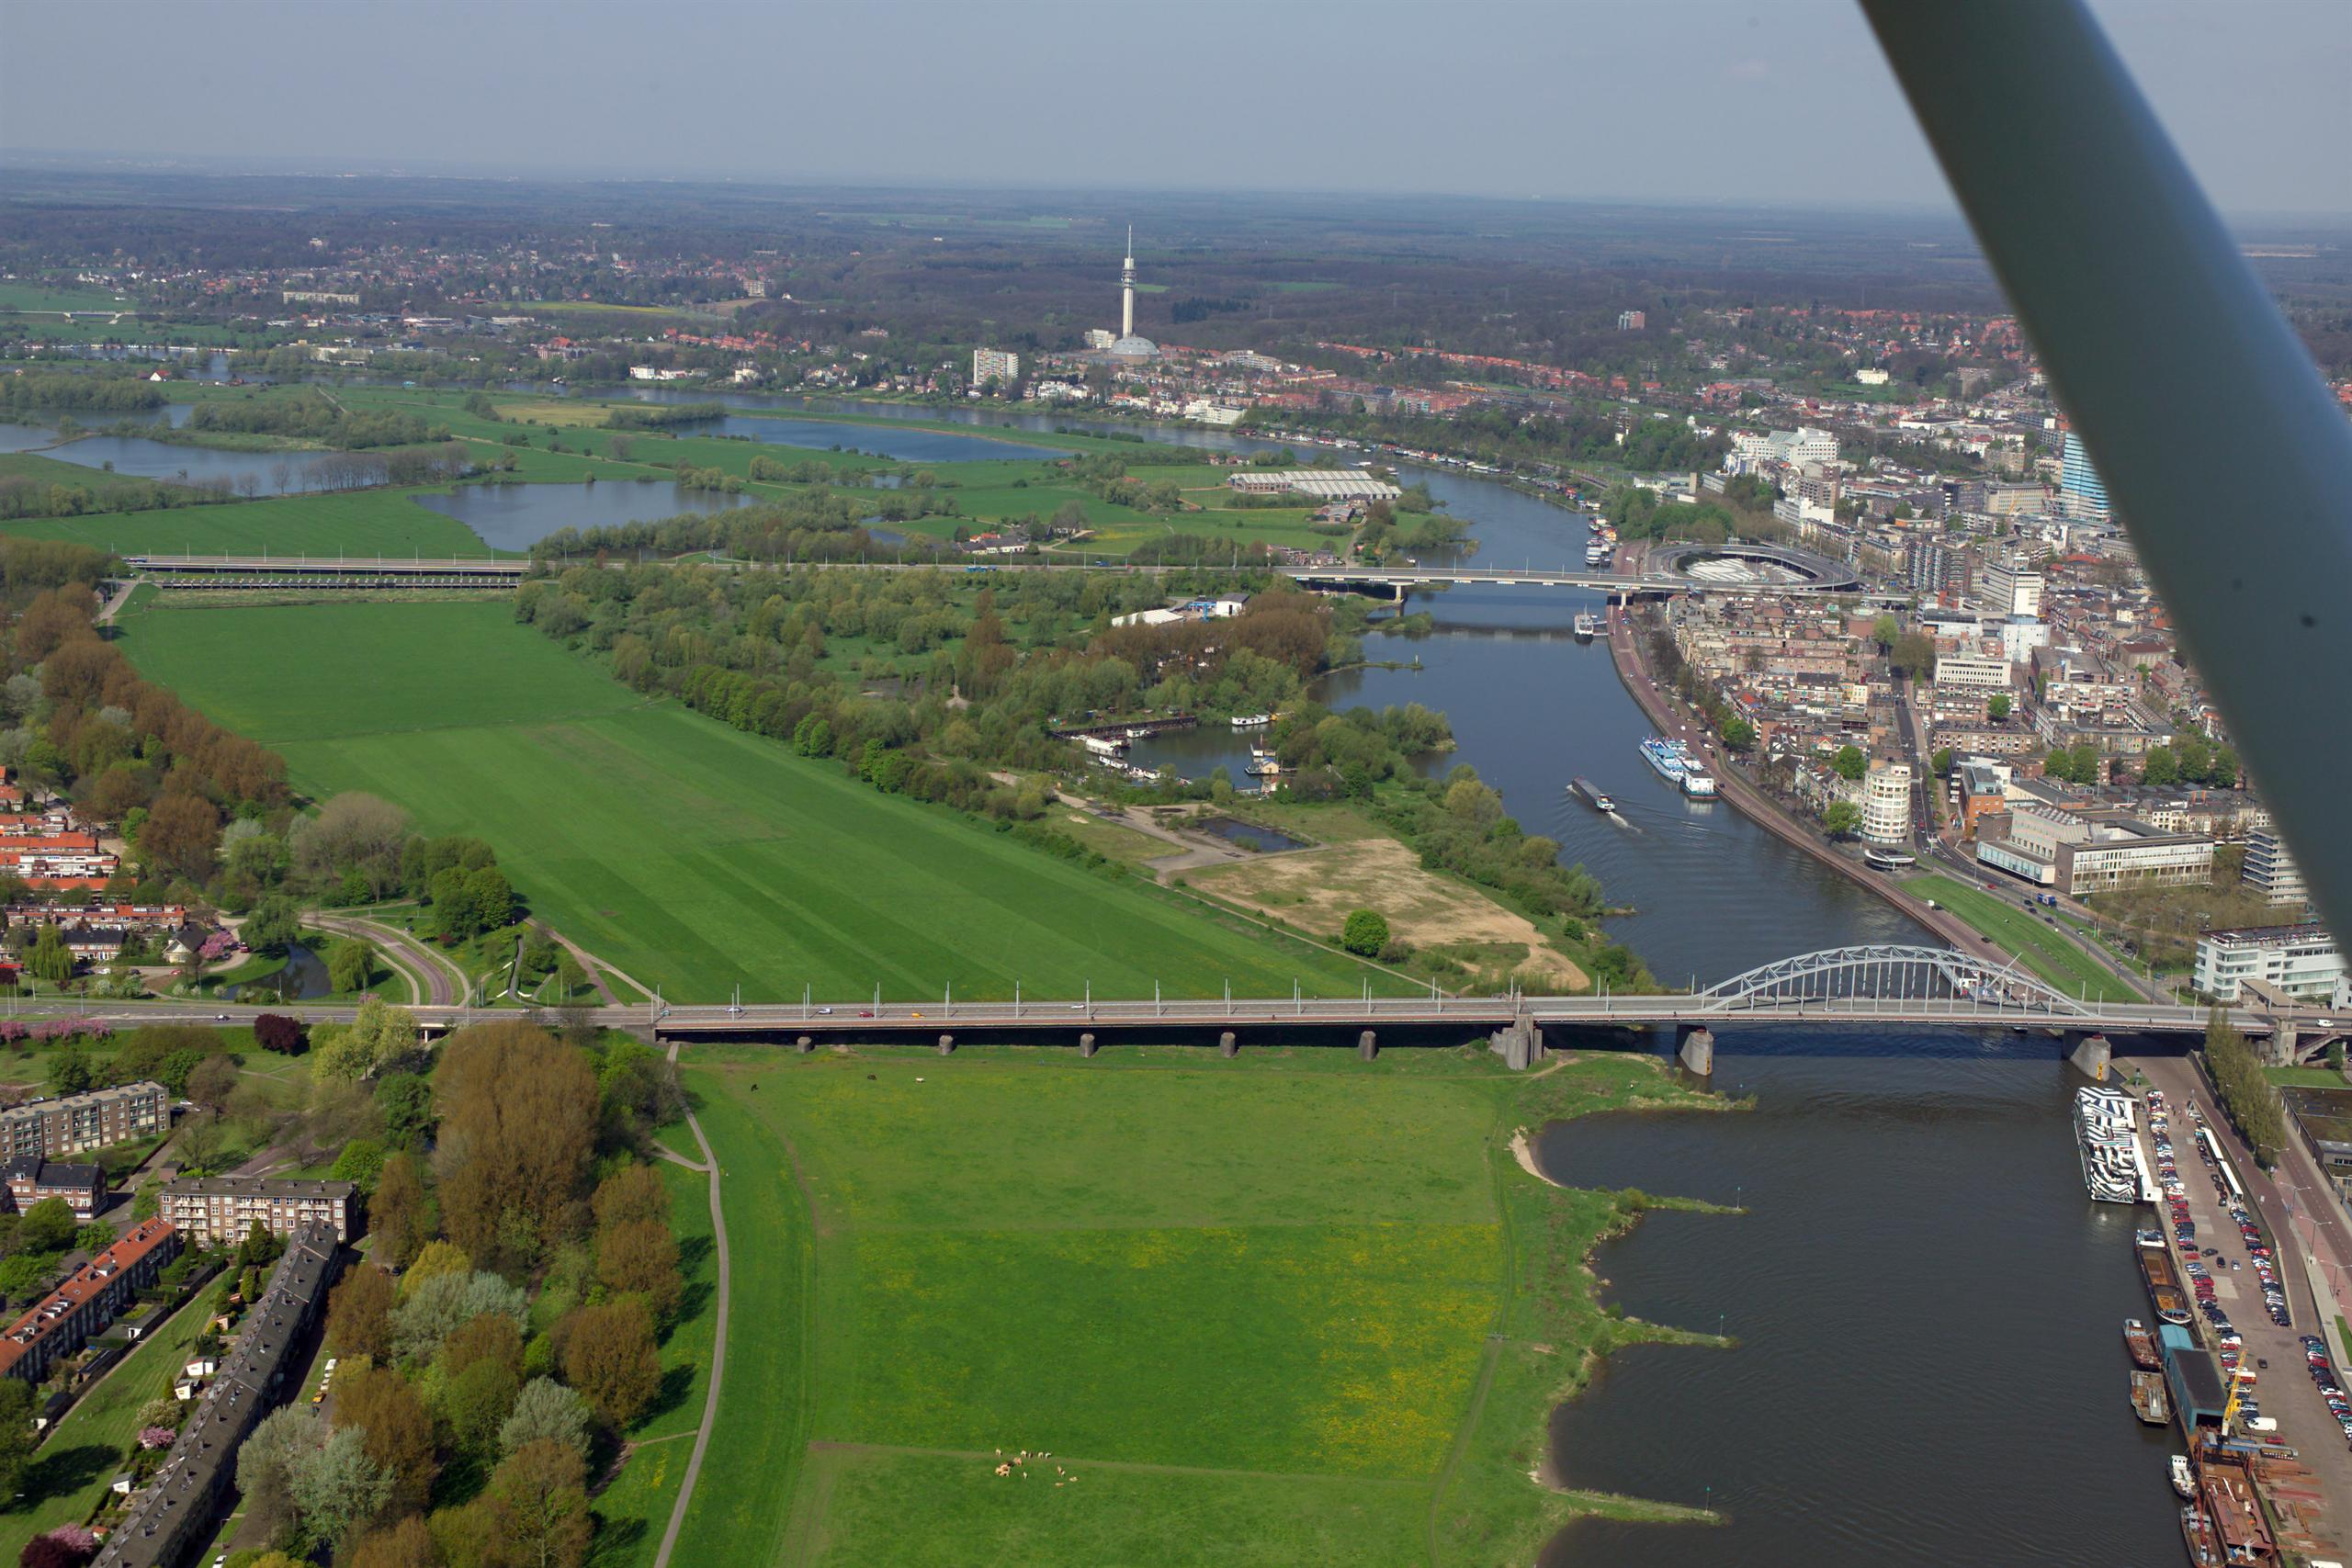 The Netherlands lie at the downstream end of the major river catchments of Rhine and Meuse Rivers